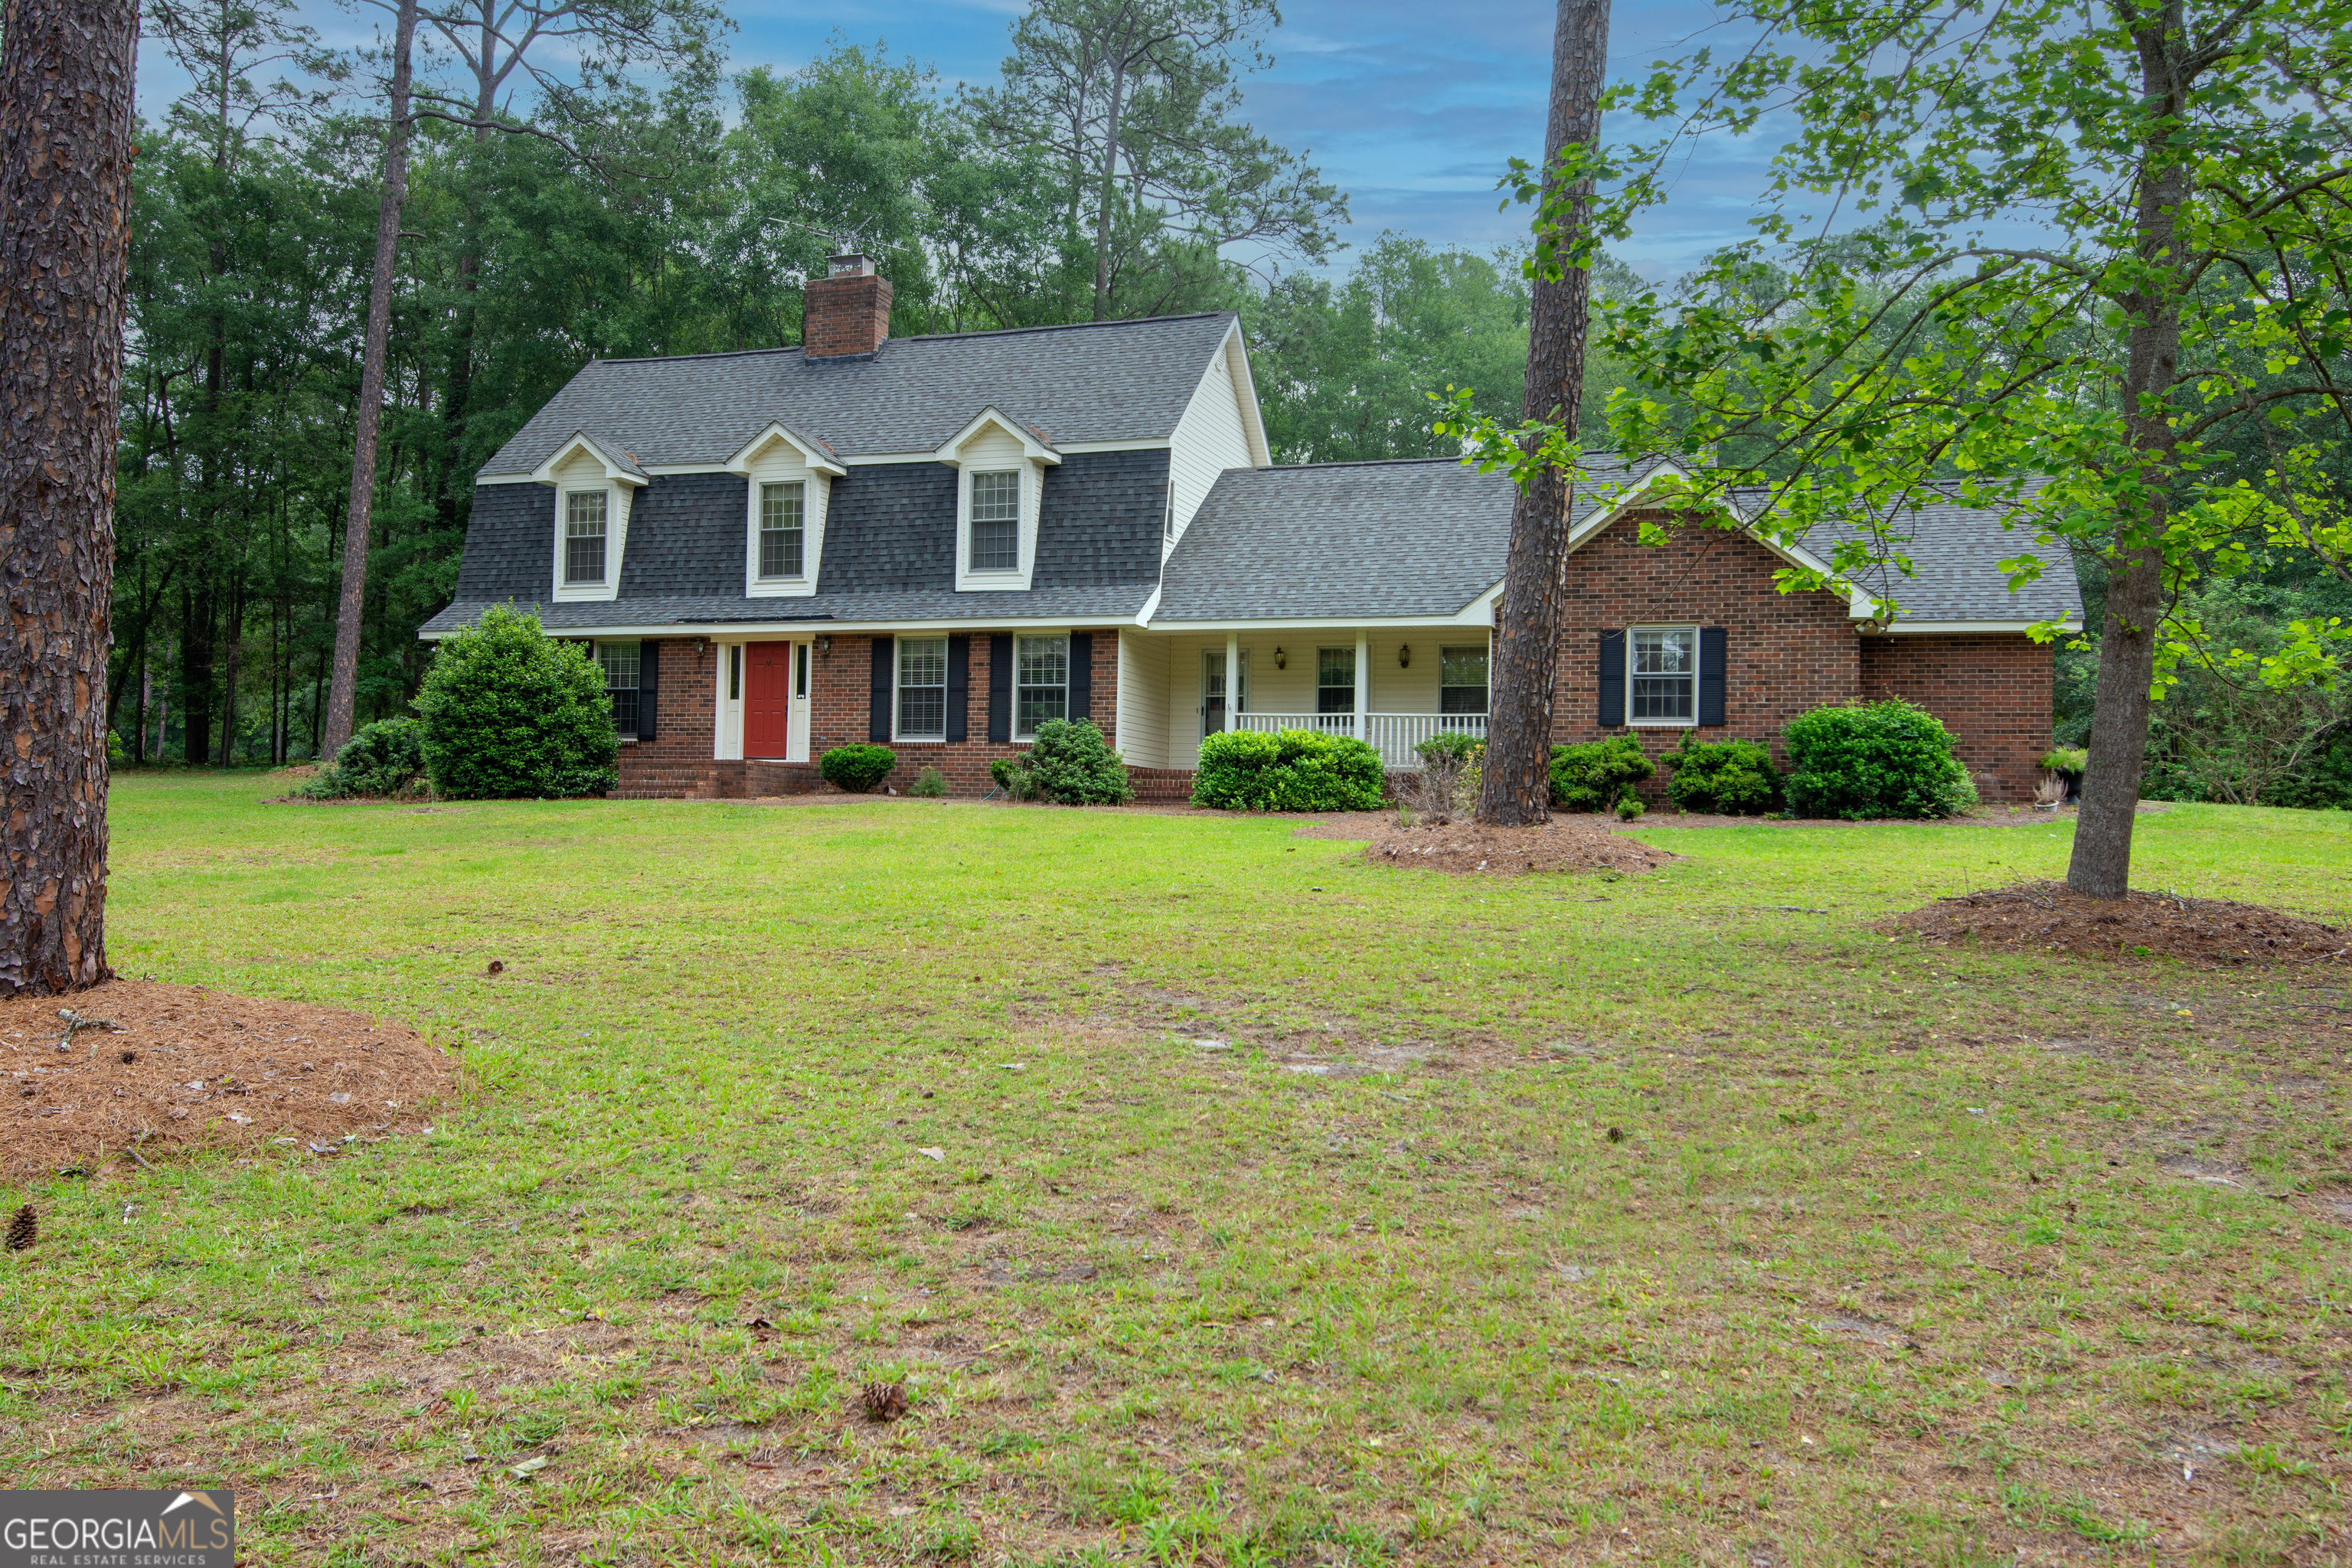 a front view of a house with yard and green space